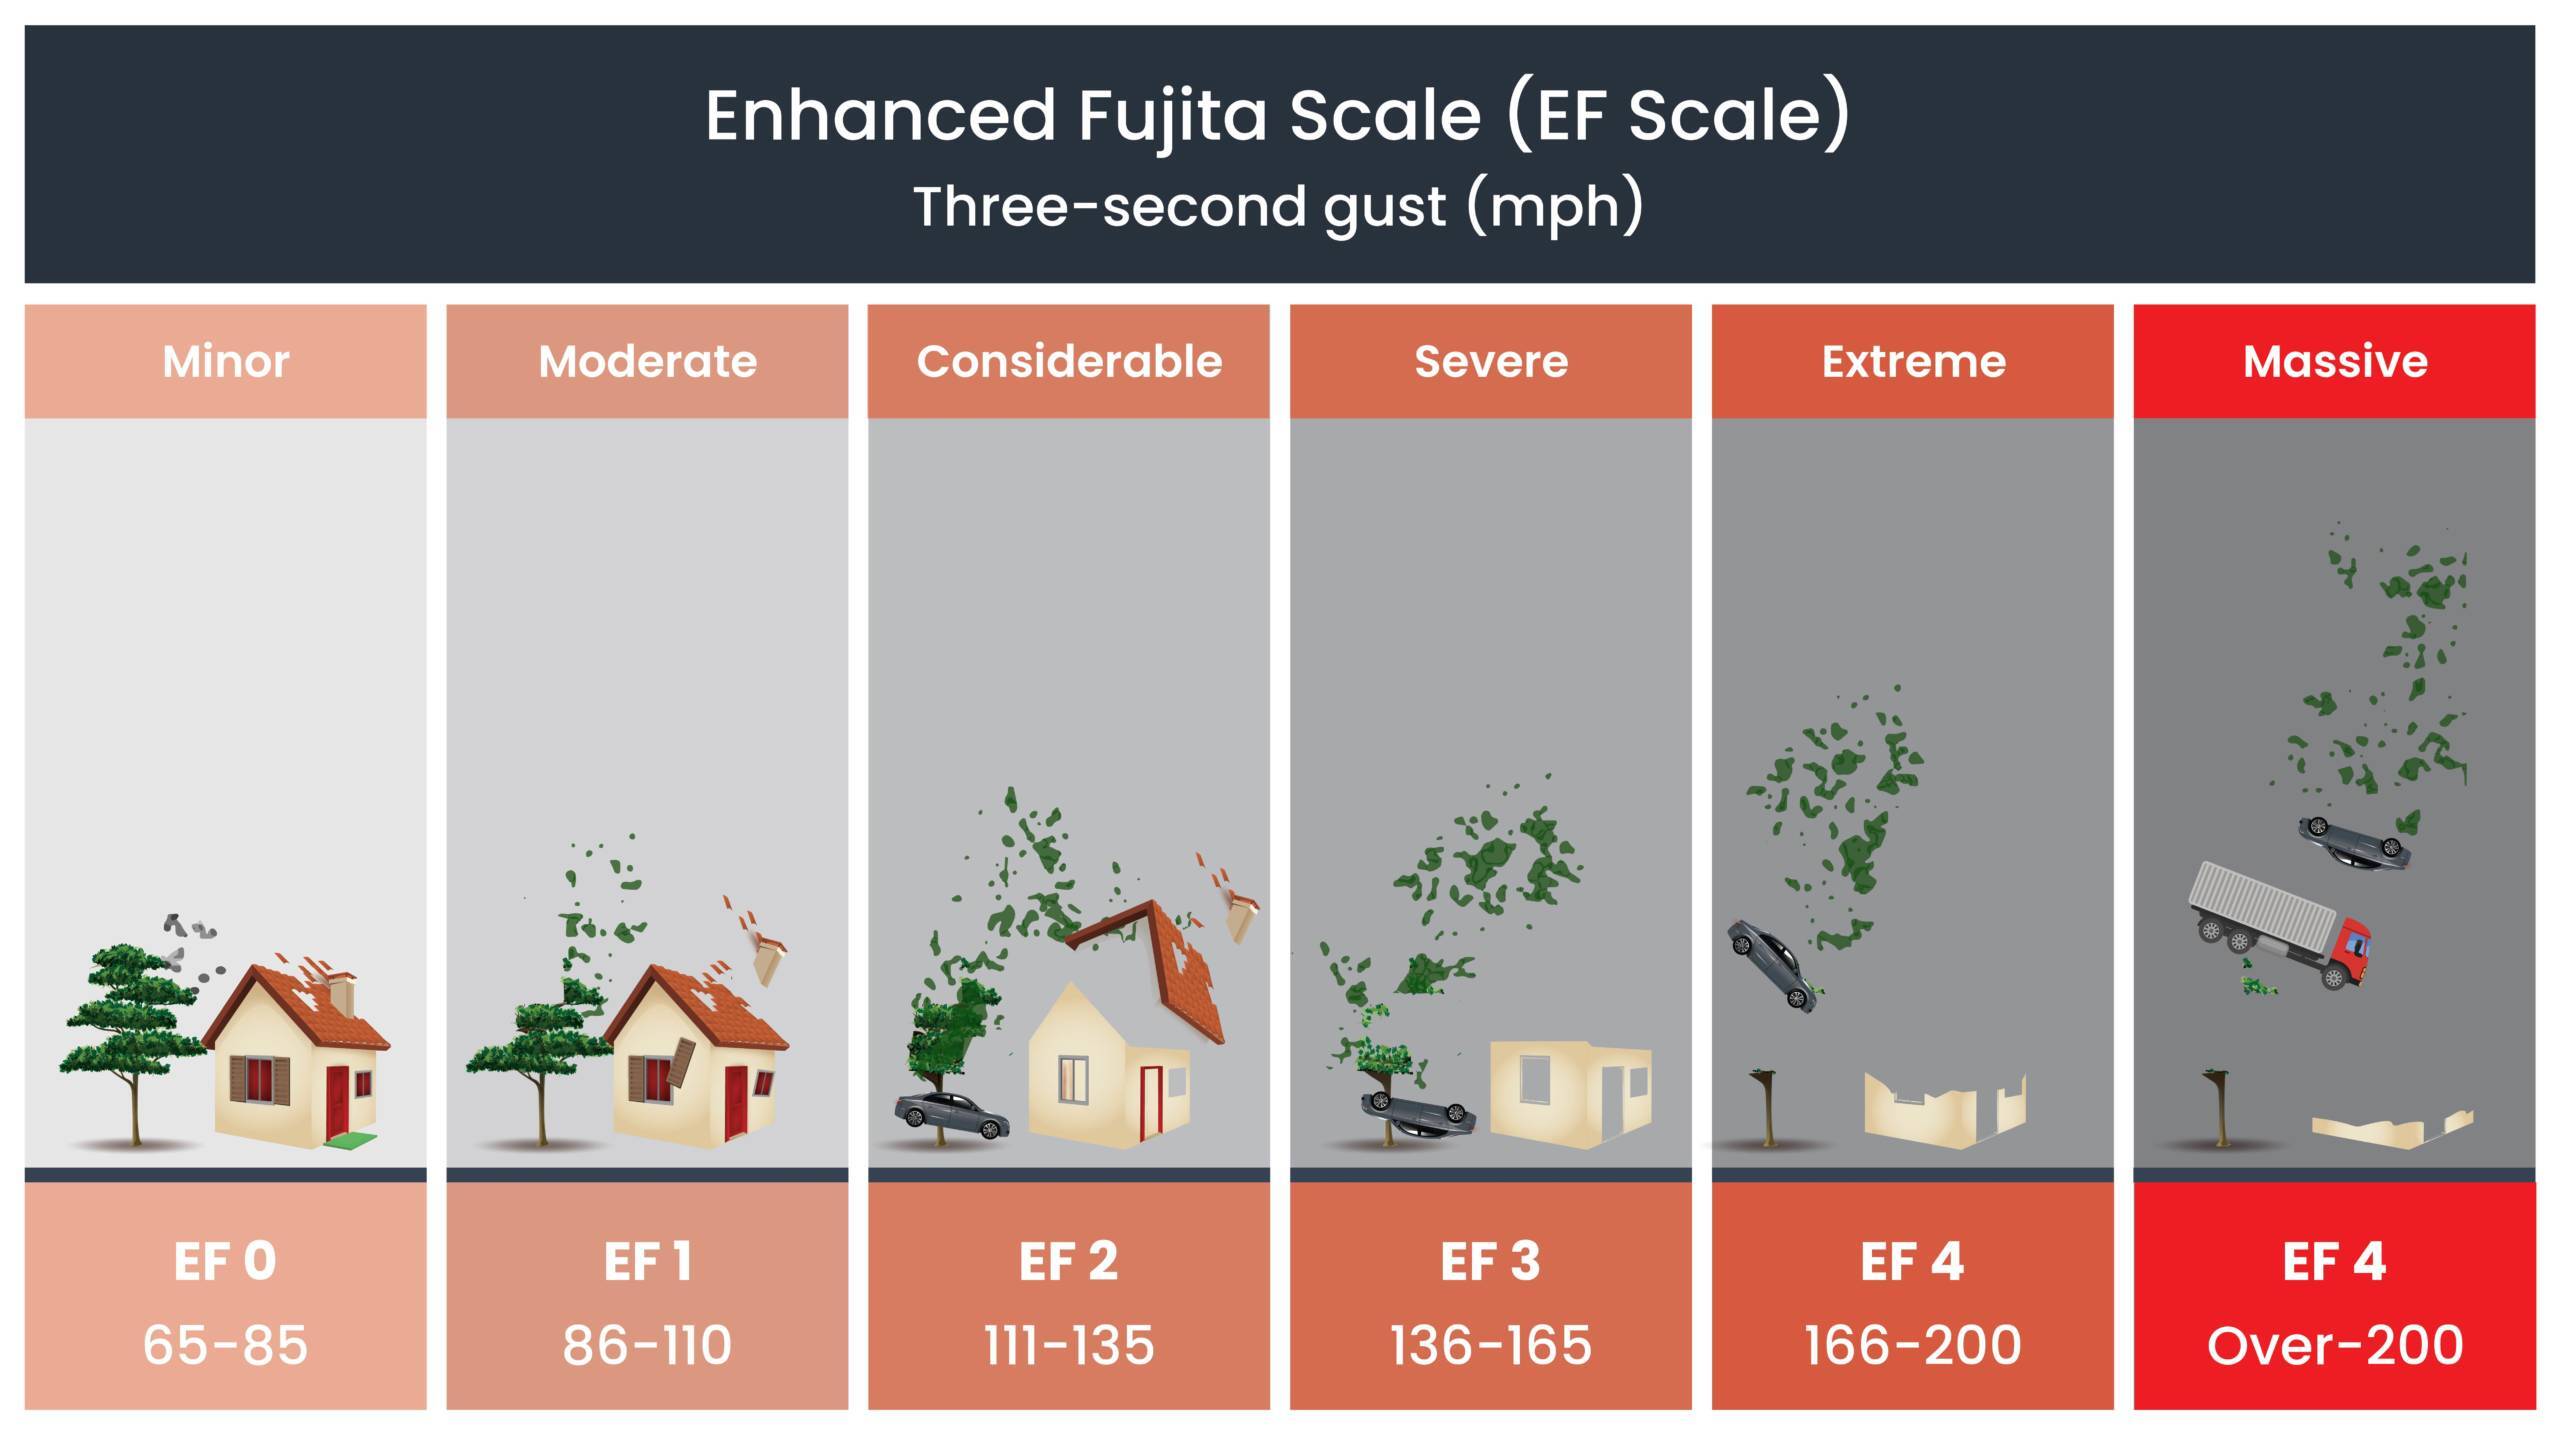 Image demonstrating destructiveness of tornadoes by EF scale